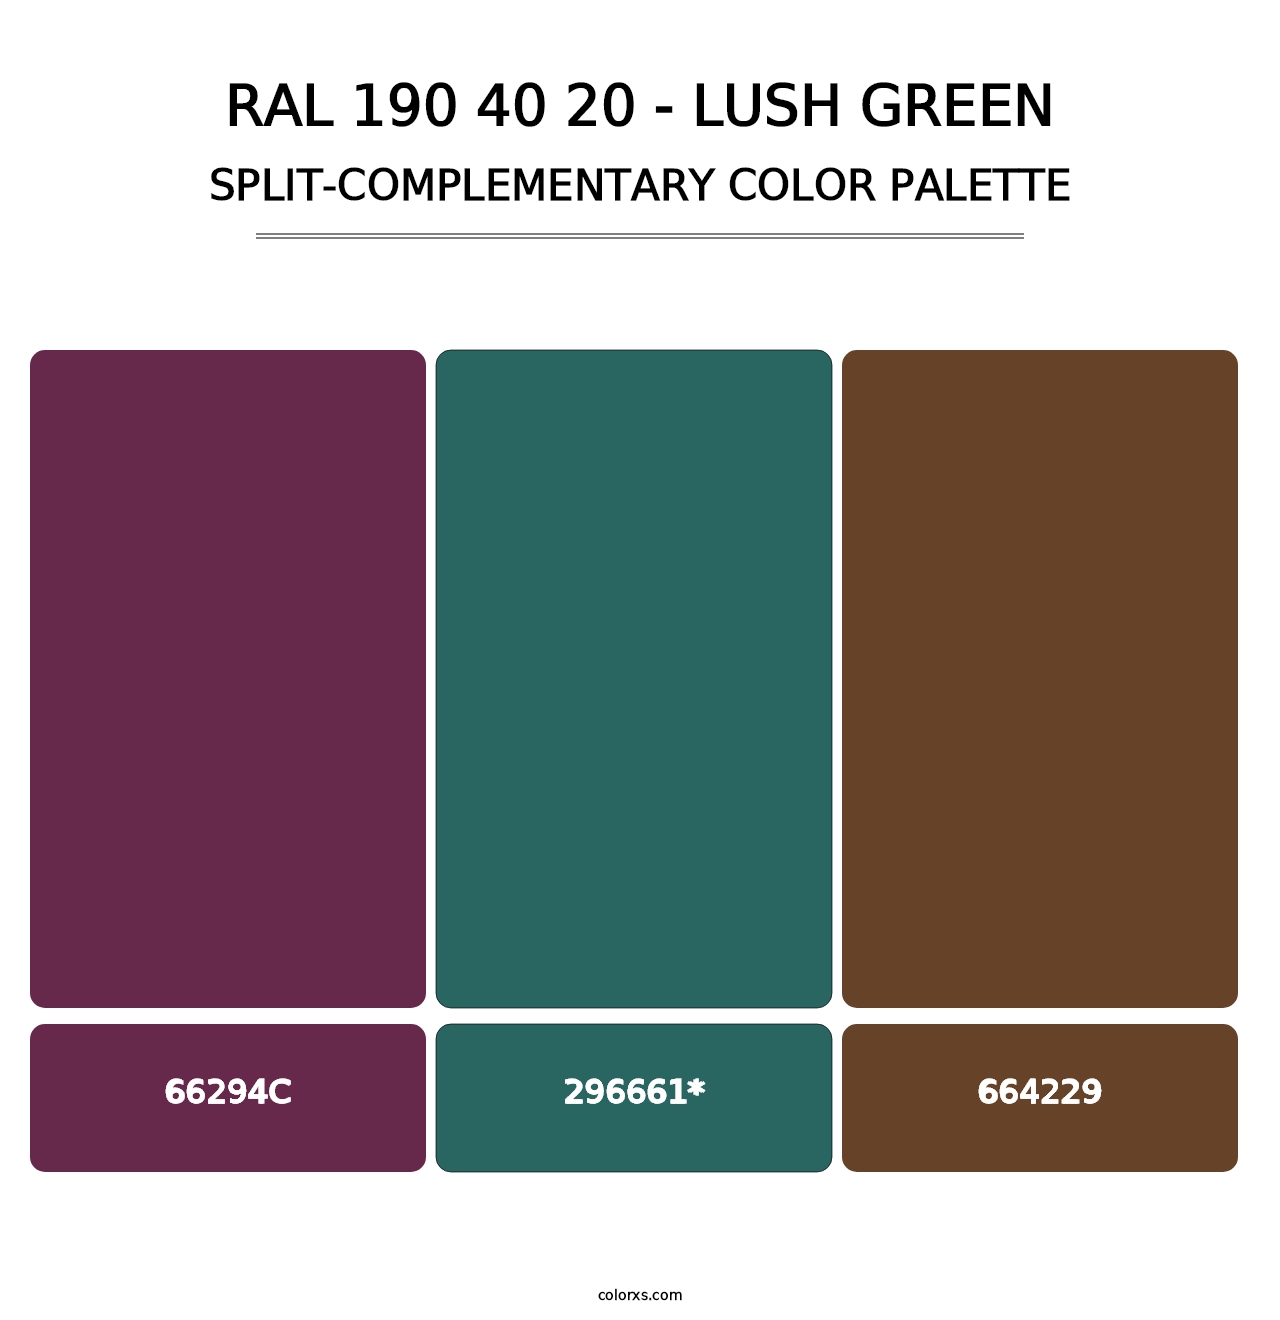 RAL 190 40 20 - Lush Green - Split-Complementary Color Palette